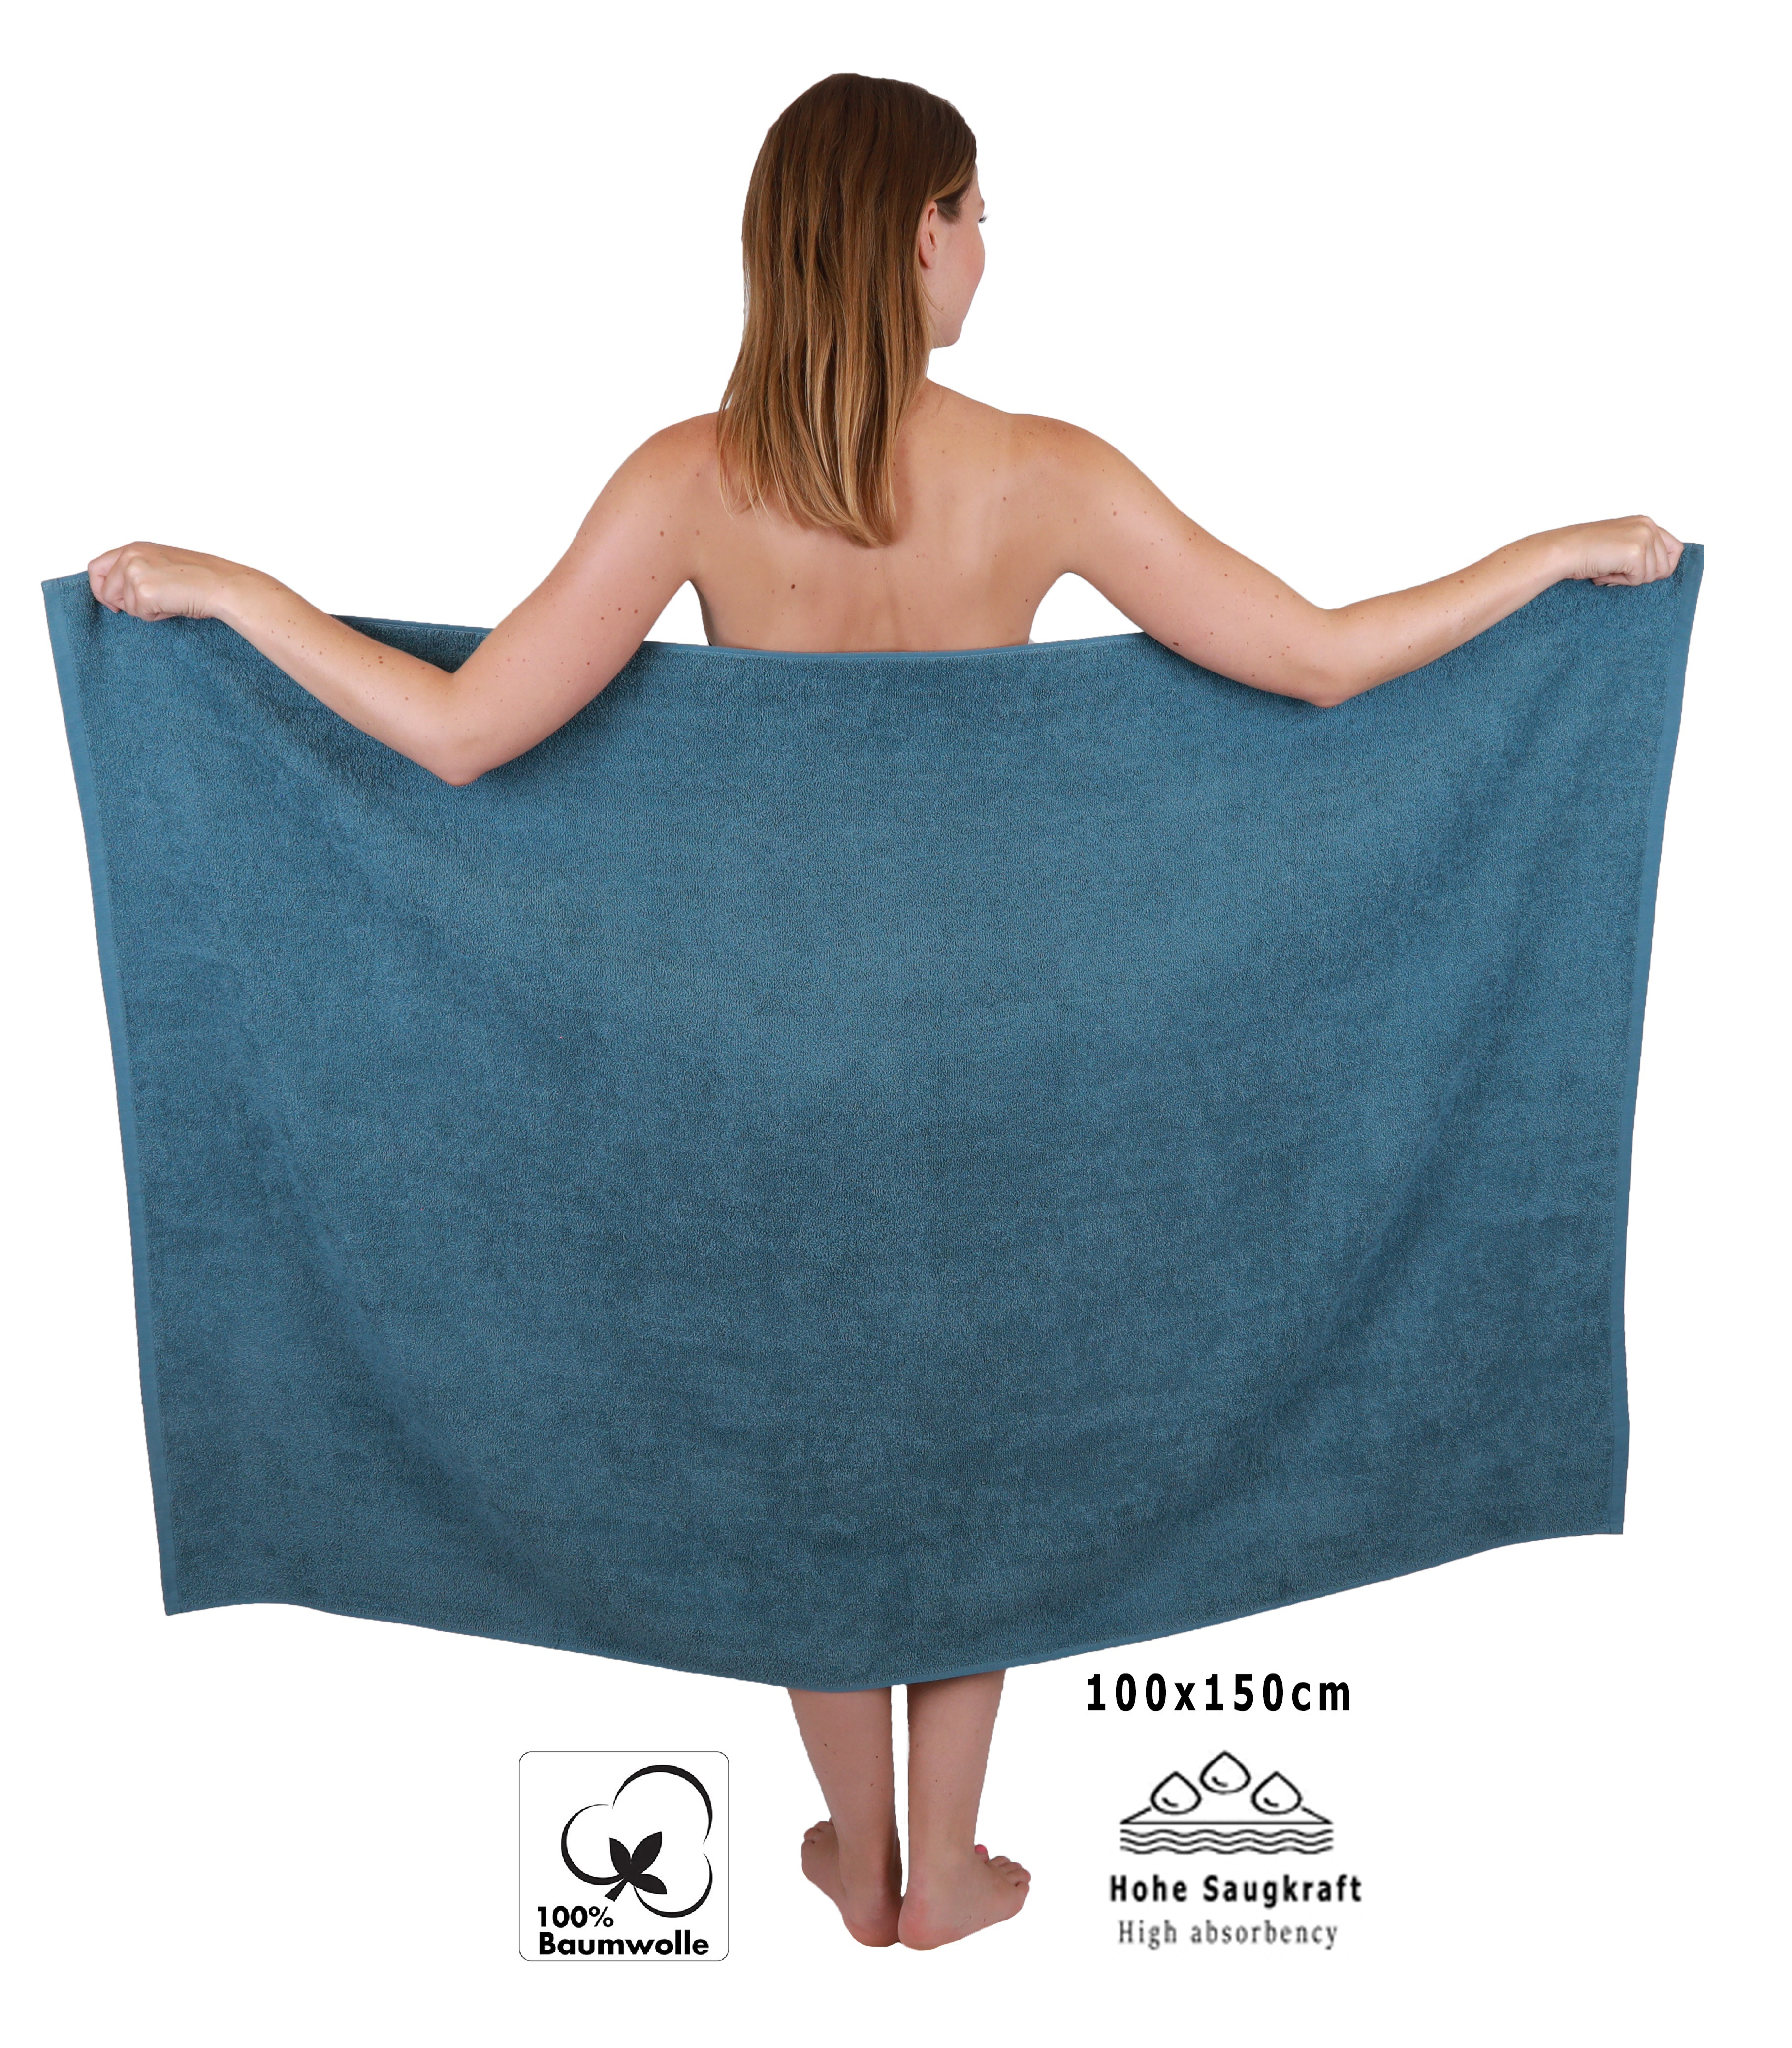 Cotton or Microfiber Towel: Which is Better for Your Skin